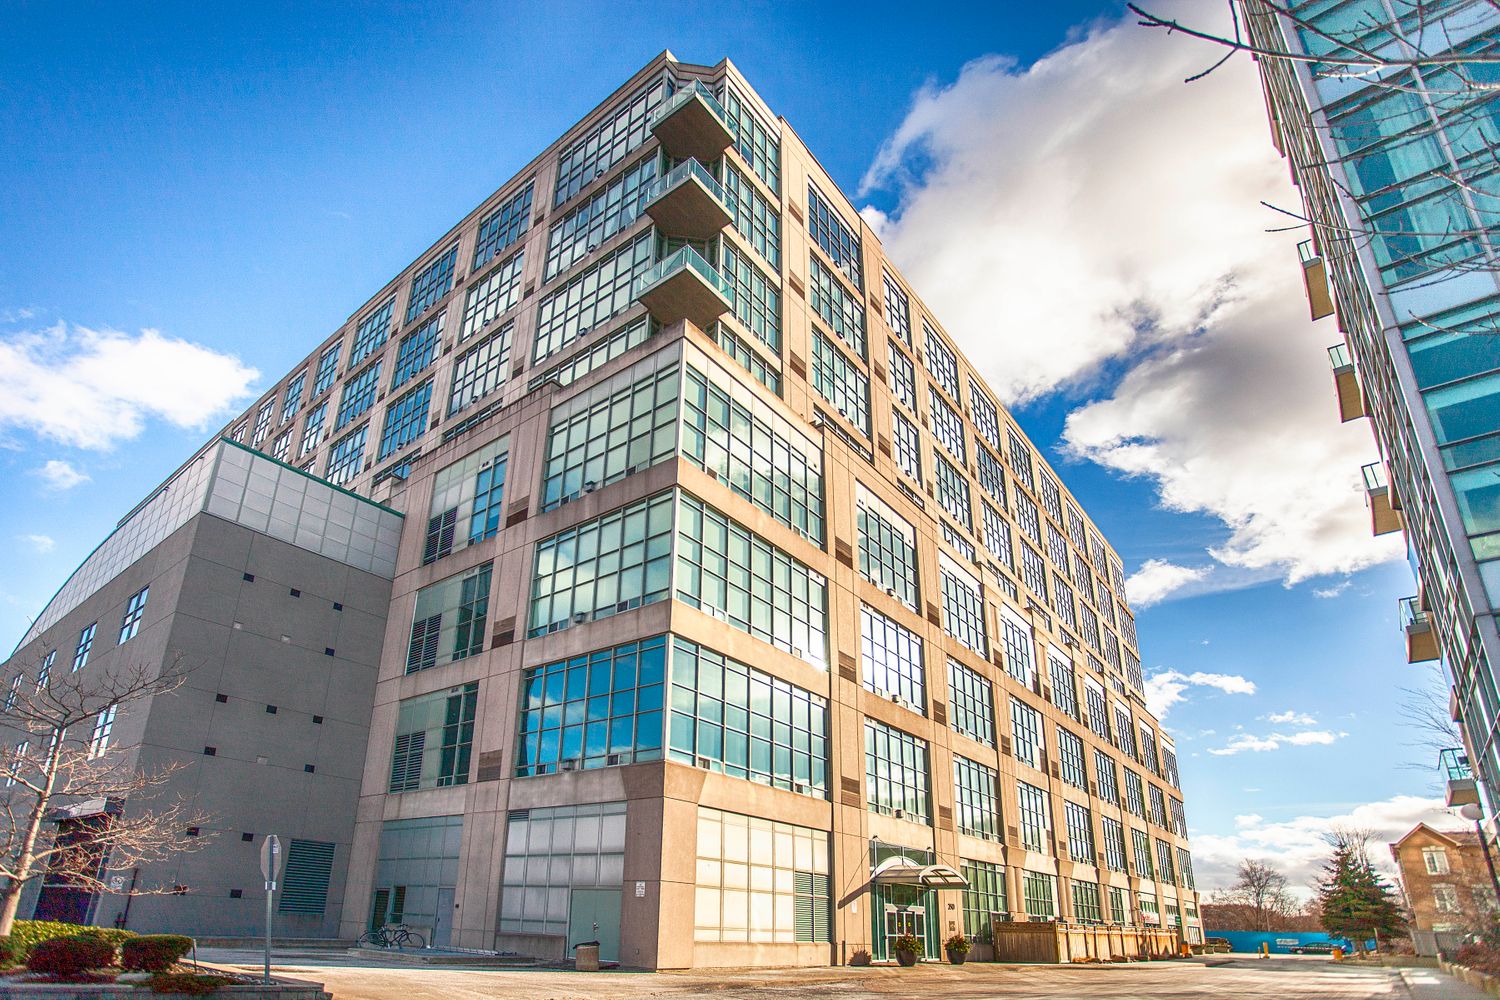 250 Manitoba Street. The Warehouse Lofts | Mystic Pointe is located in  Etobicoke, Toronto - image #1 of 3